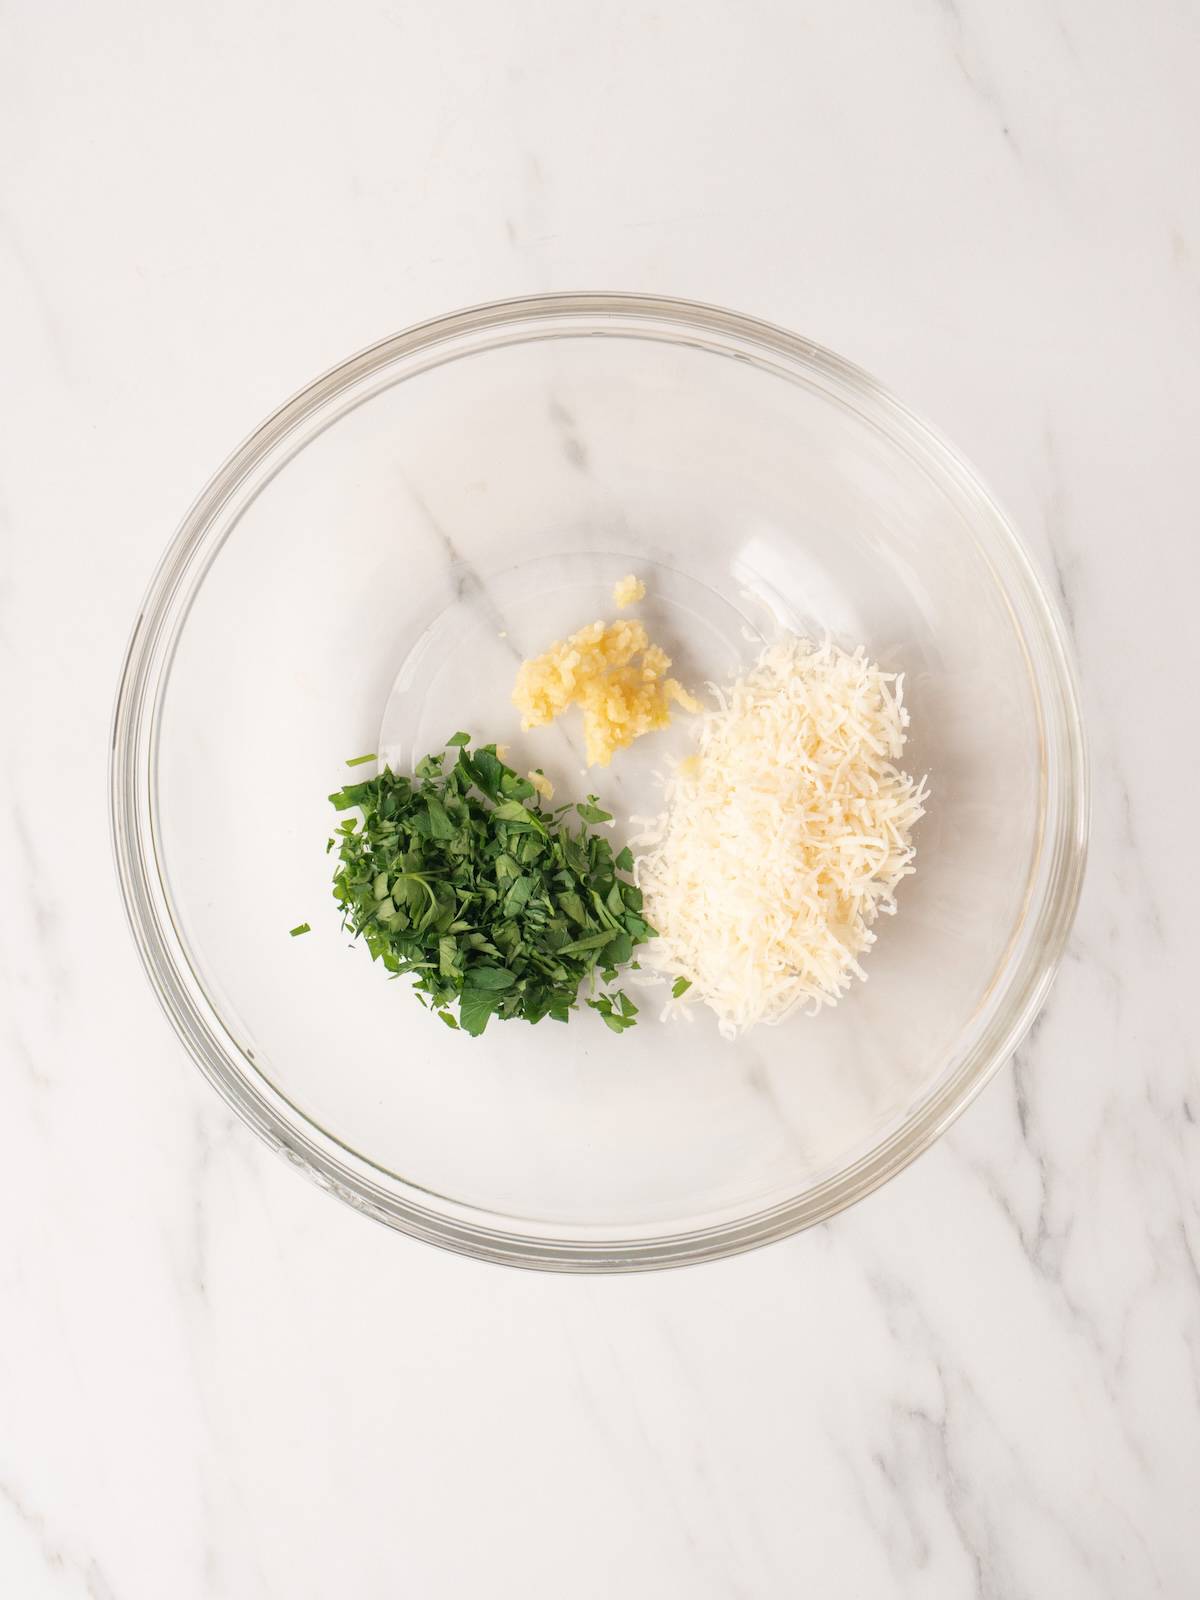 A glass bowl with chopped parsley, grated parmesan cheese and minced garlic.